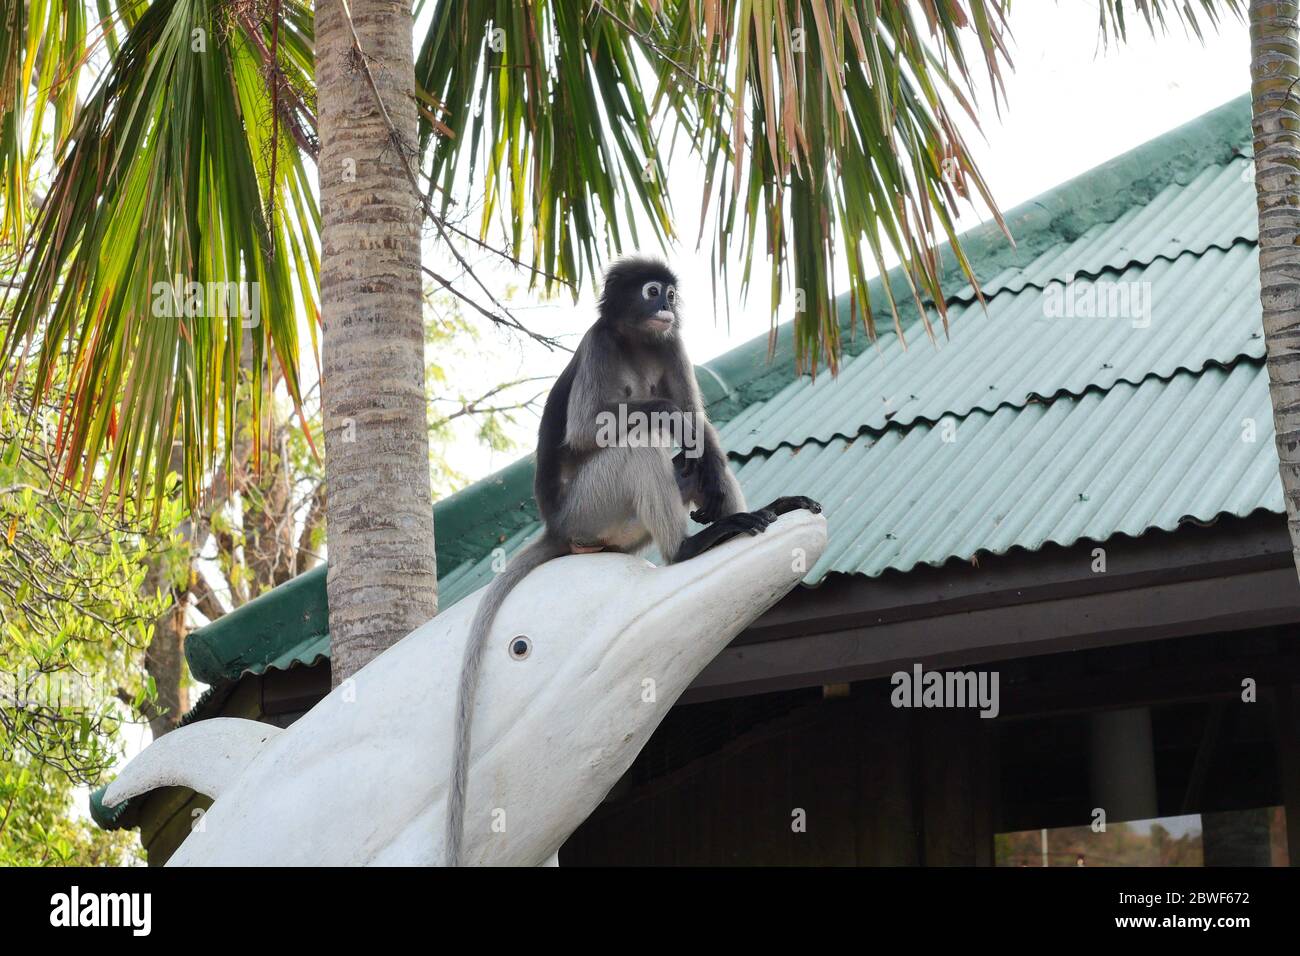 The Dusky leaf monkey sitting on the head of the white dolphin statue with palm tree and green house in background, Khao Sam Roi Yot National Park Stock Photo